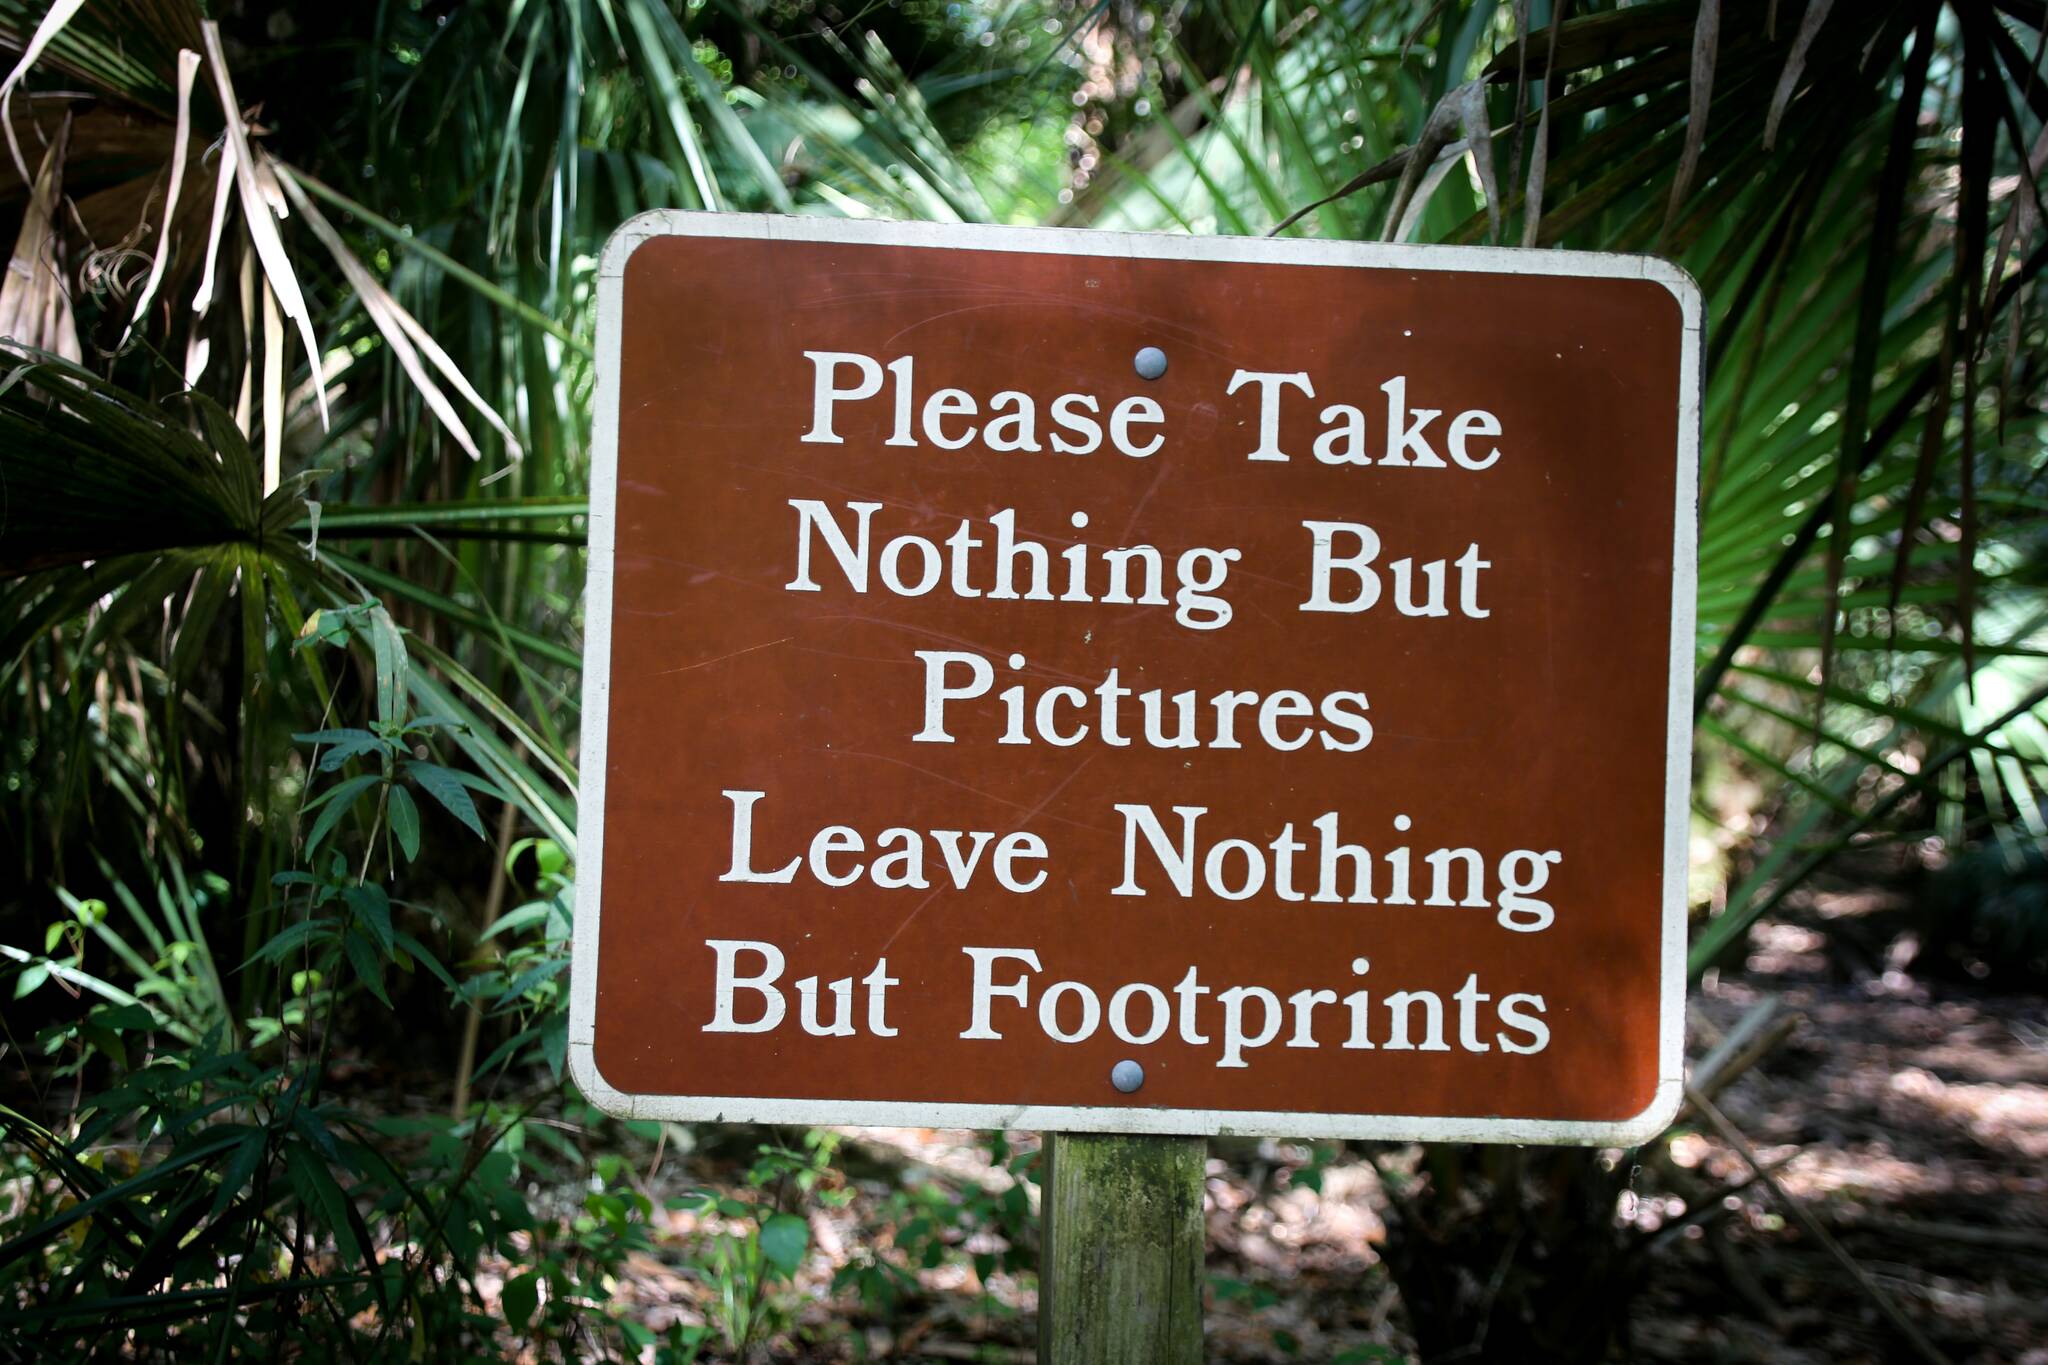 Contributed photo by Upslash
A “Leave No Trace” sign in a Florida state park says “Take nothing but pictures, leave nothing but footprints.” This image first appeared on https://www.florida-guidebook.com